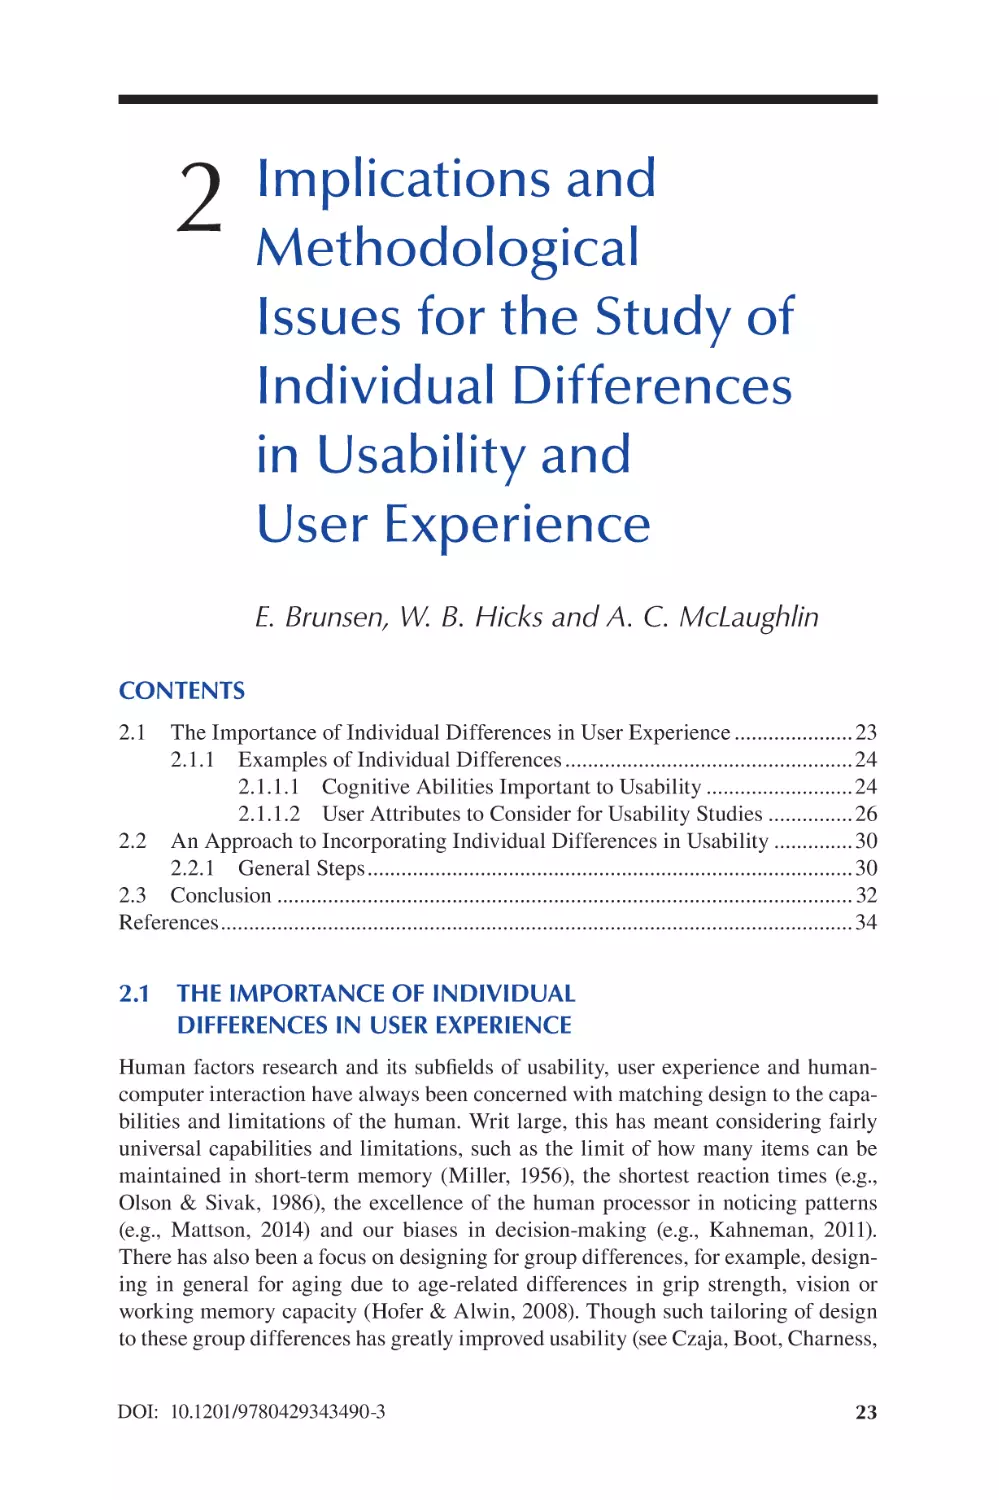 Chapter 2 Implications and Methodological Issues for the Study of Individual Differences in Usability and User Experience
2.1 The Importance of Individual Differences in User Experience